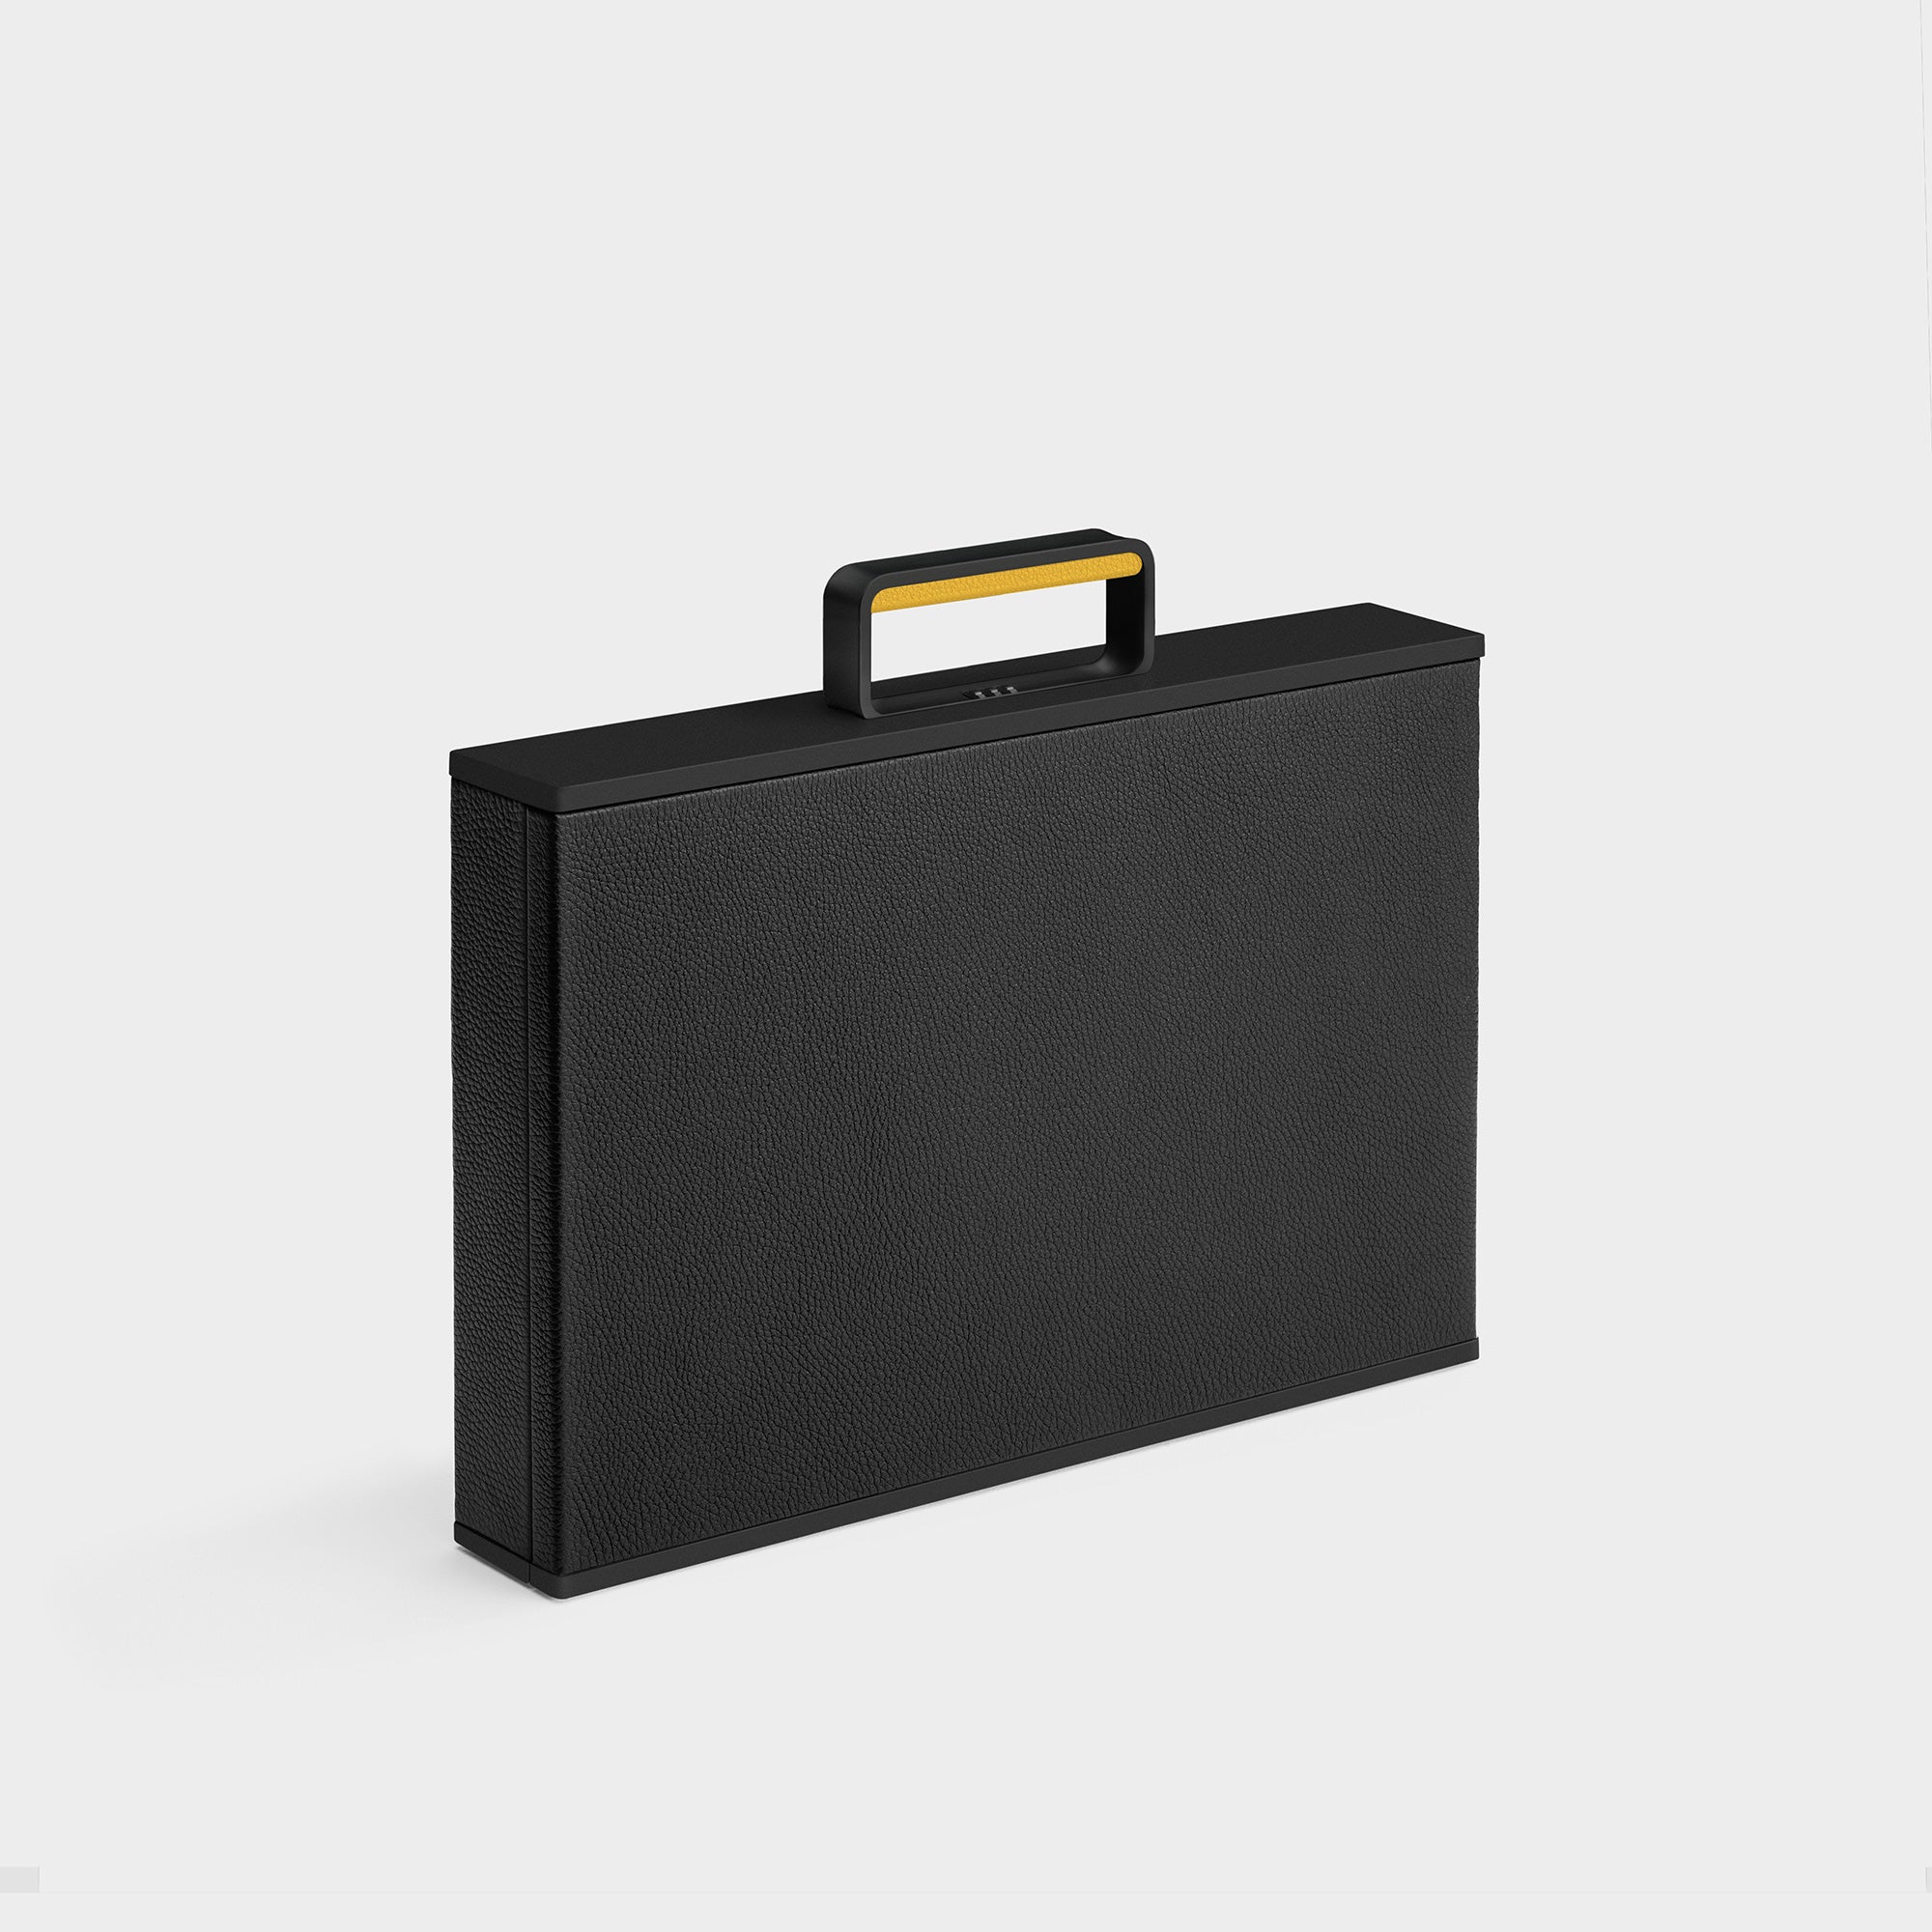 Charles Simon Mackenzie briefcase in all black with sunflower accents made from aluminum and carbon fiber casing, fine French leather and Alcantara lining